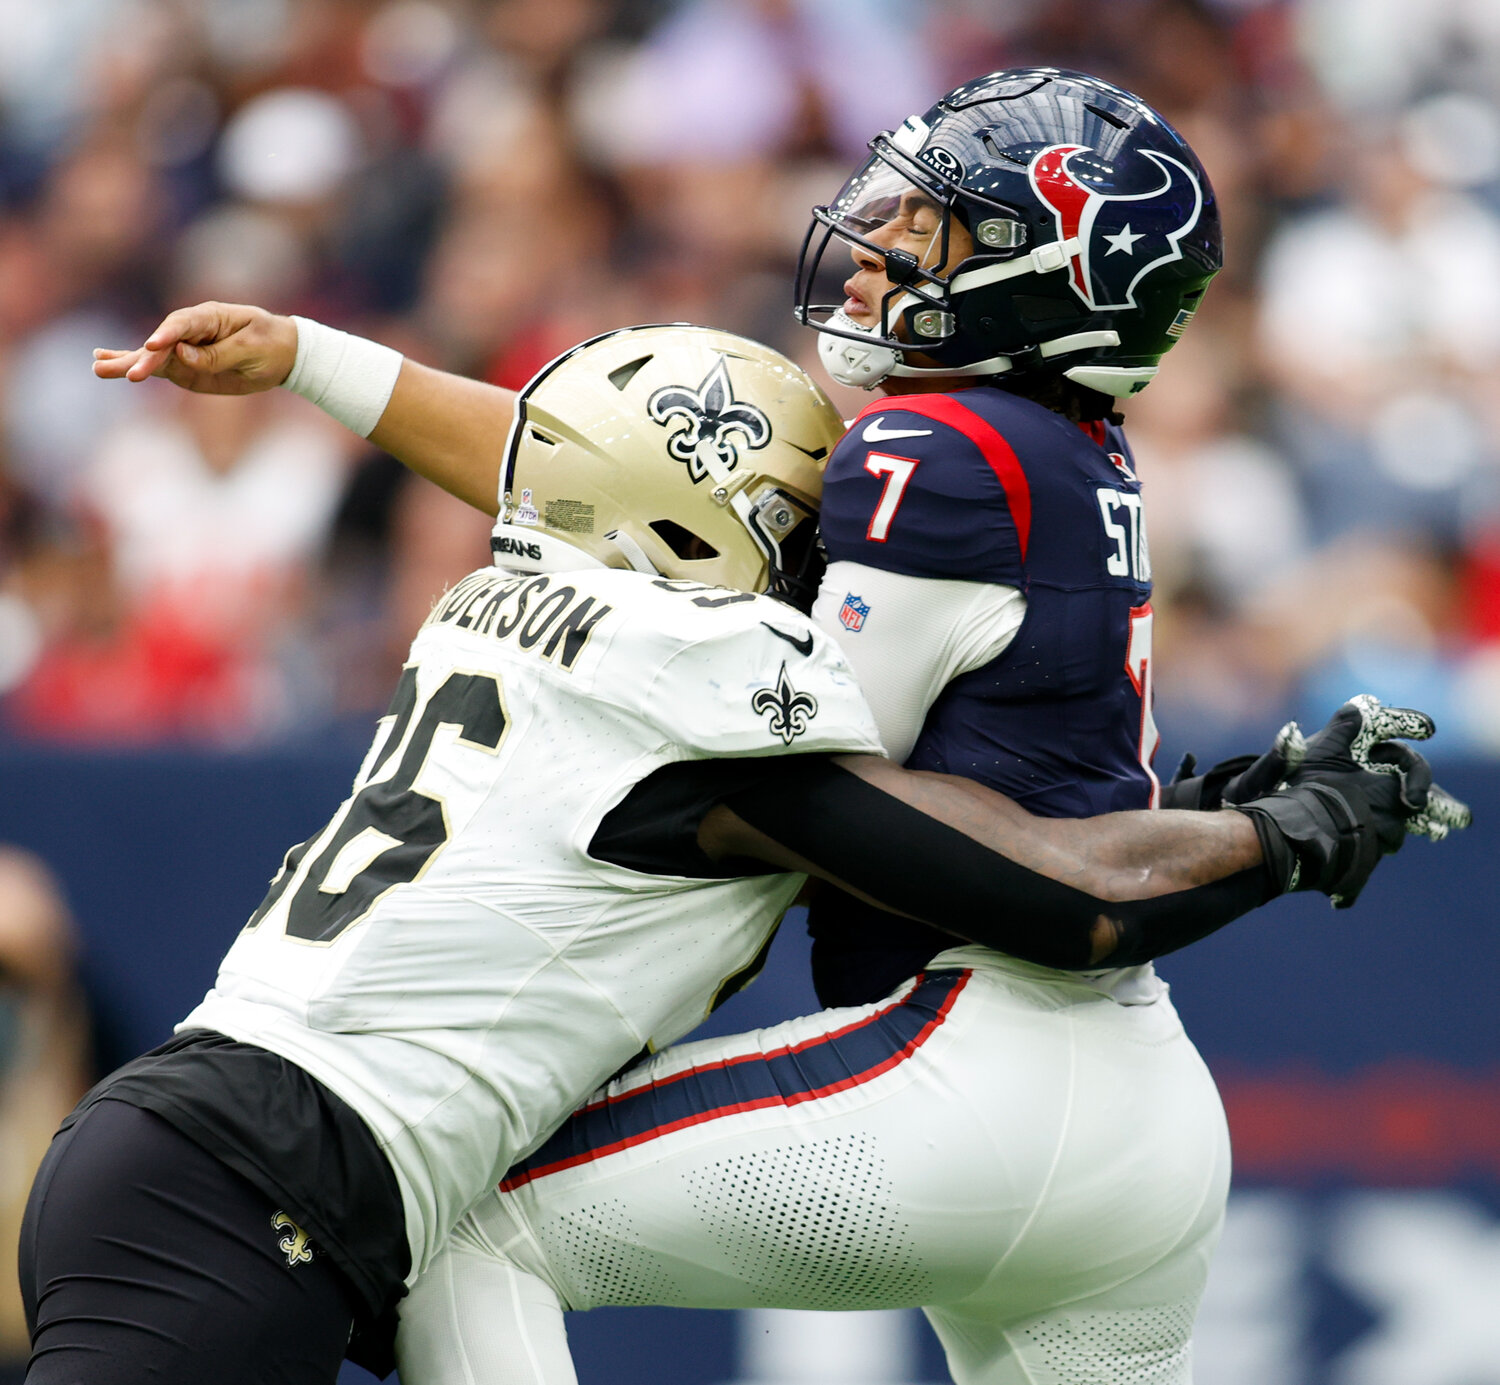 Texans quarterback C.J. Stroud (7) is hit by Saints defensive end Carl Granderson (96) after throwing a pass during an NFL game between the Texans and the Saints on October 15, 2023 in Houston. The Texans won, 20-13.